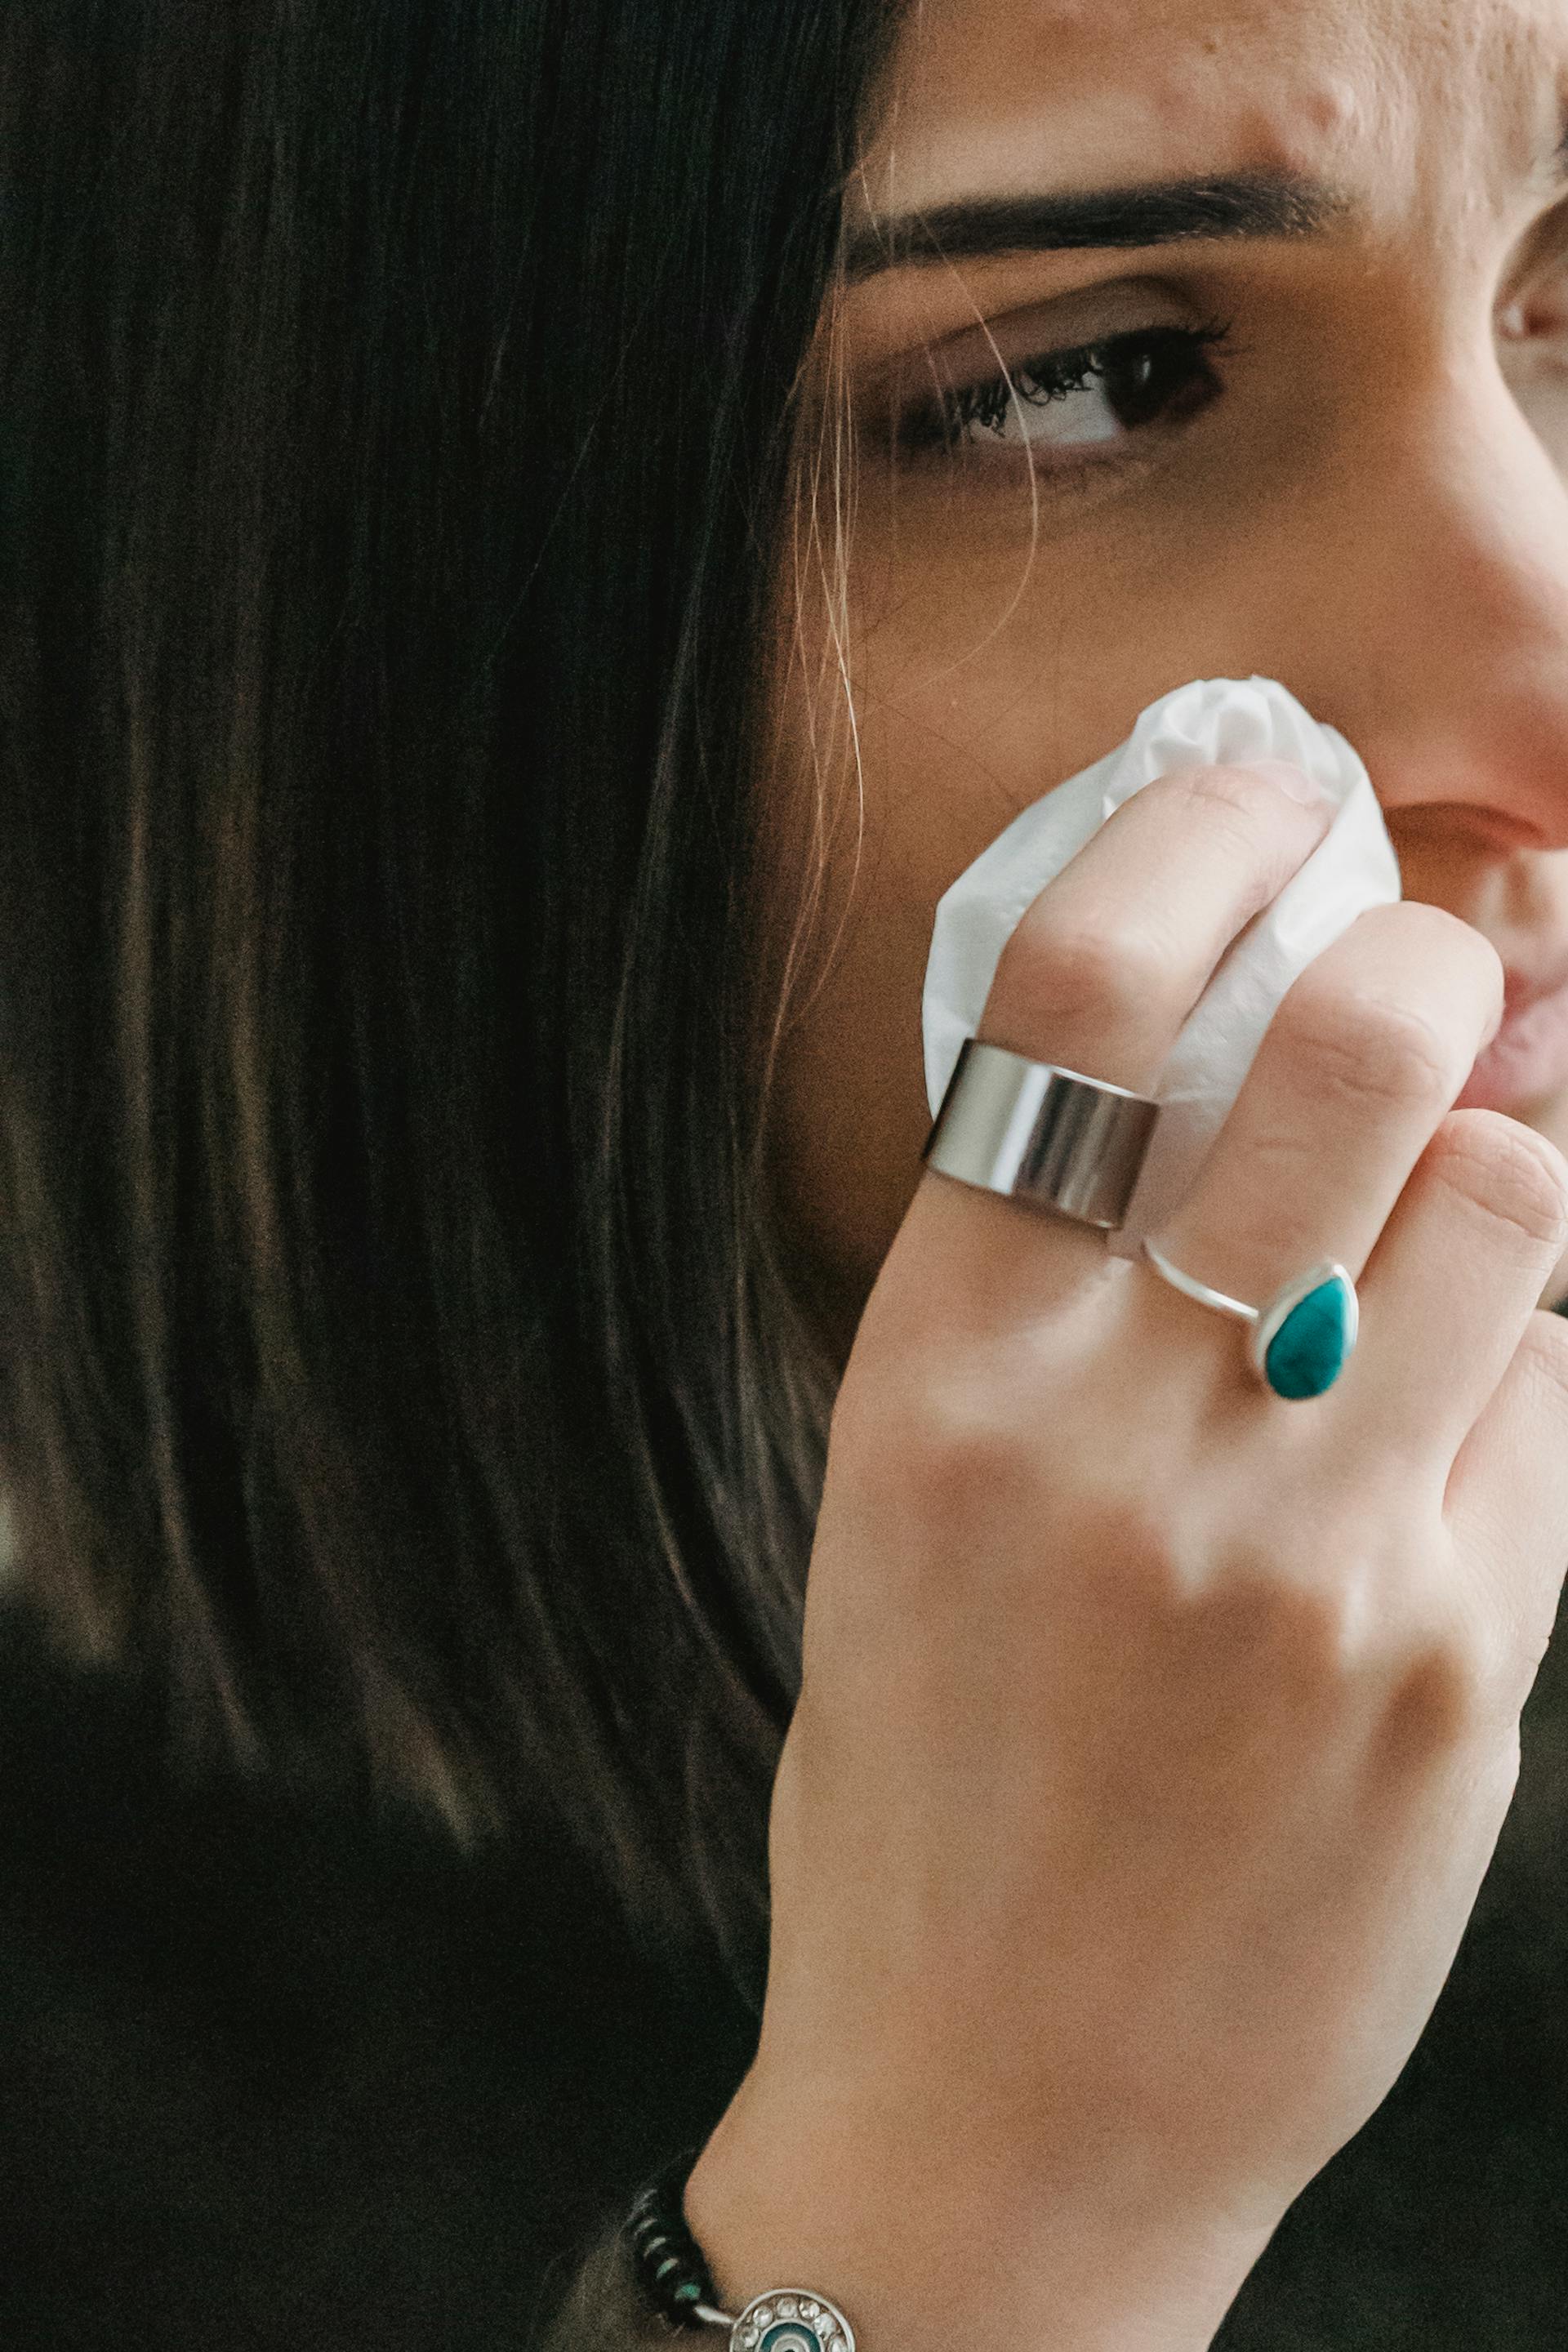 A woman wiping her tears | Source: Pexels